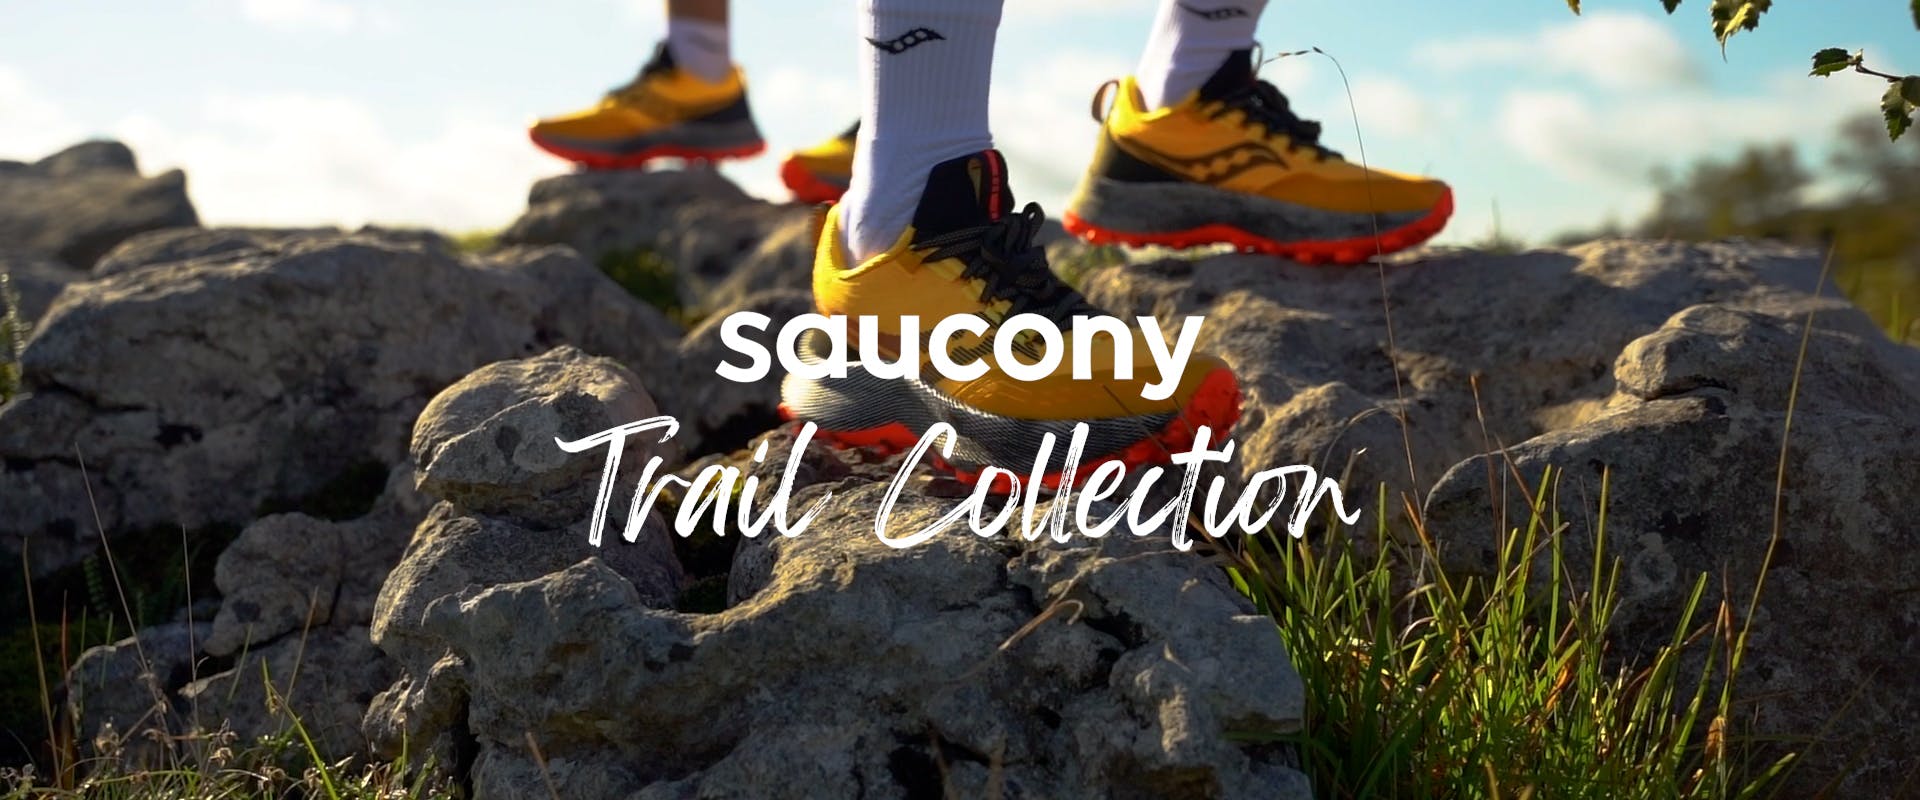 the-saucony-trail-running-shoe-collection-aw22